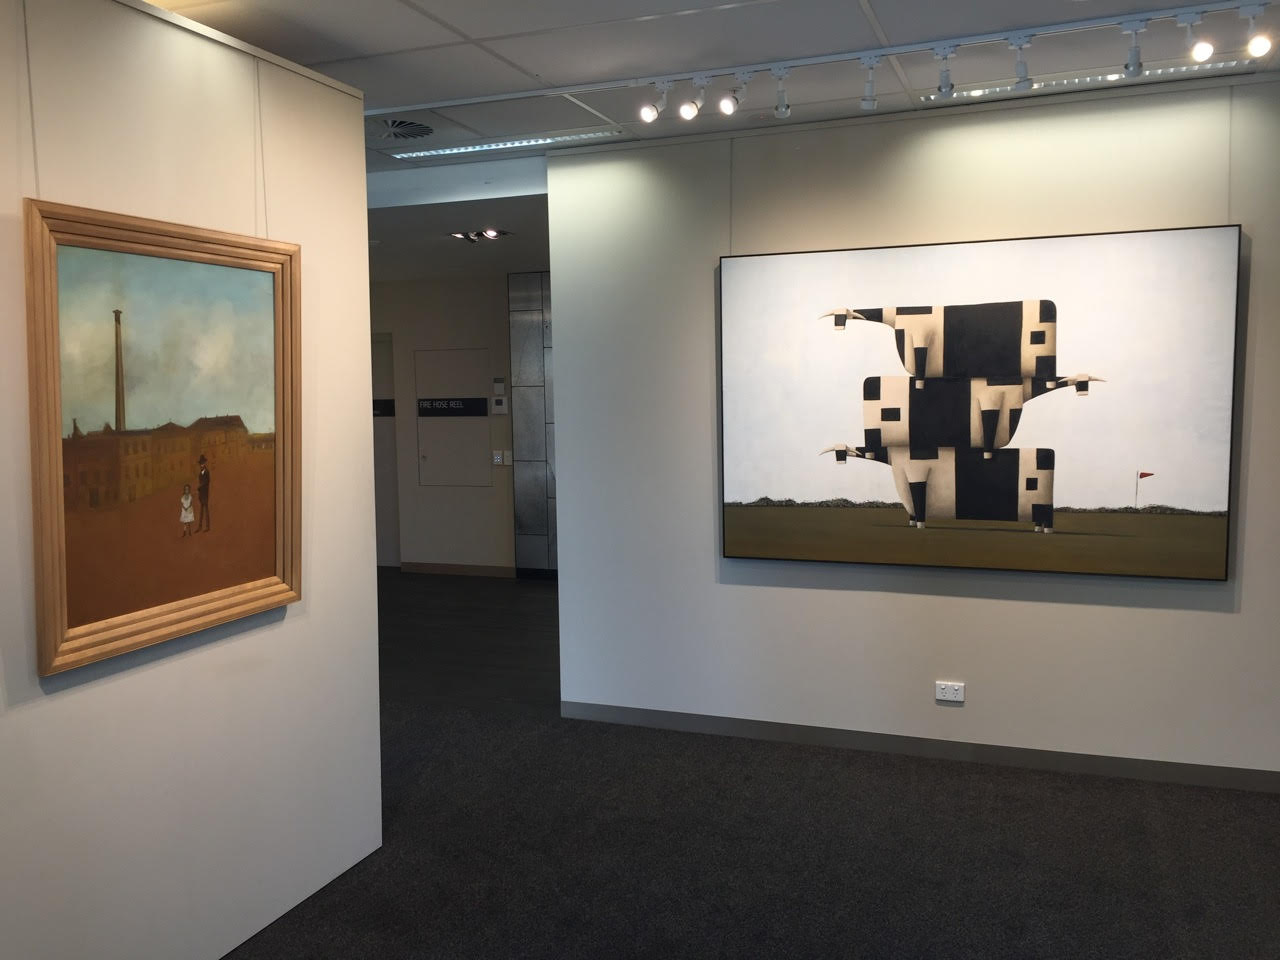 John Kelly painting, juxtaposed with Sidney Nolan painting, Sotheby's Australia, 2018